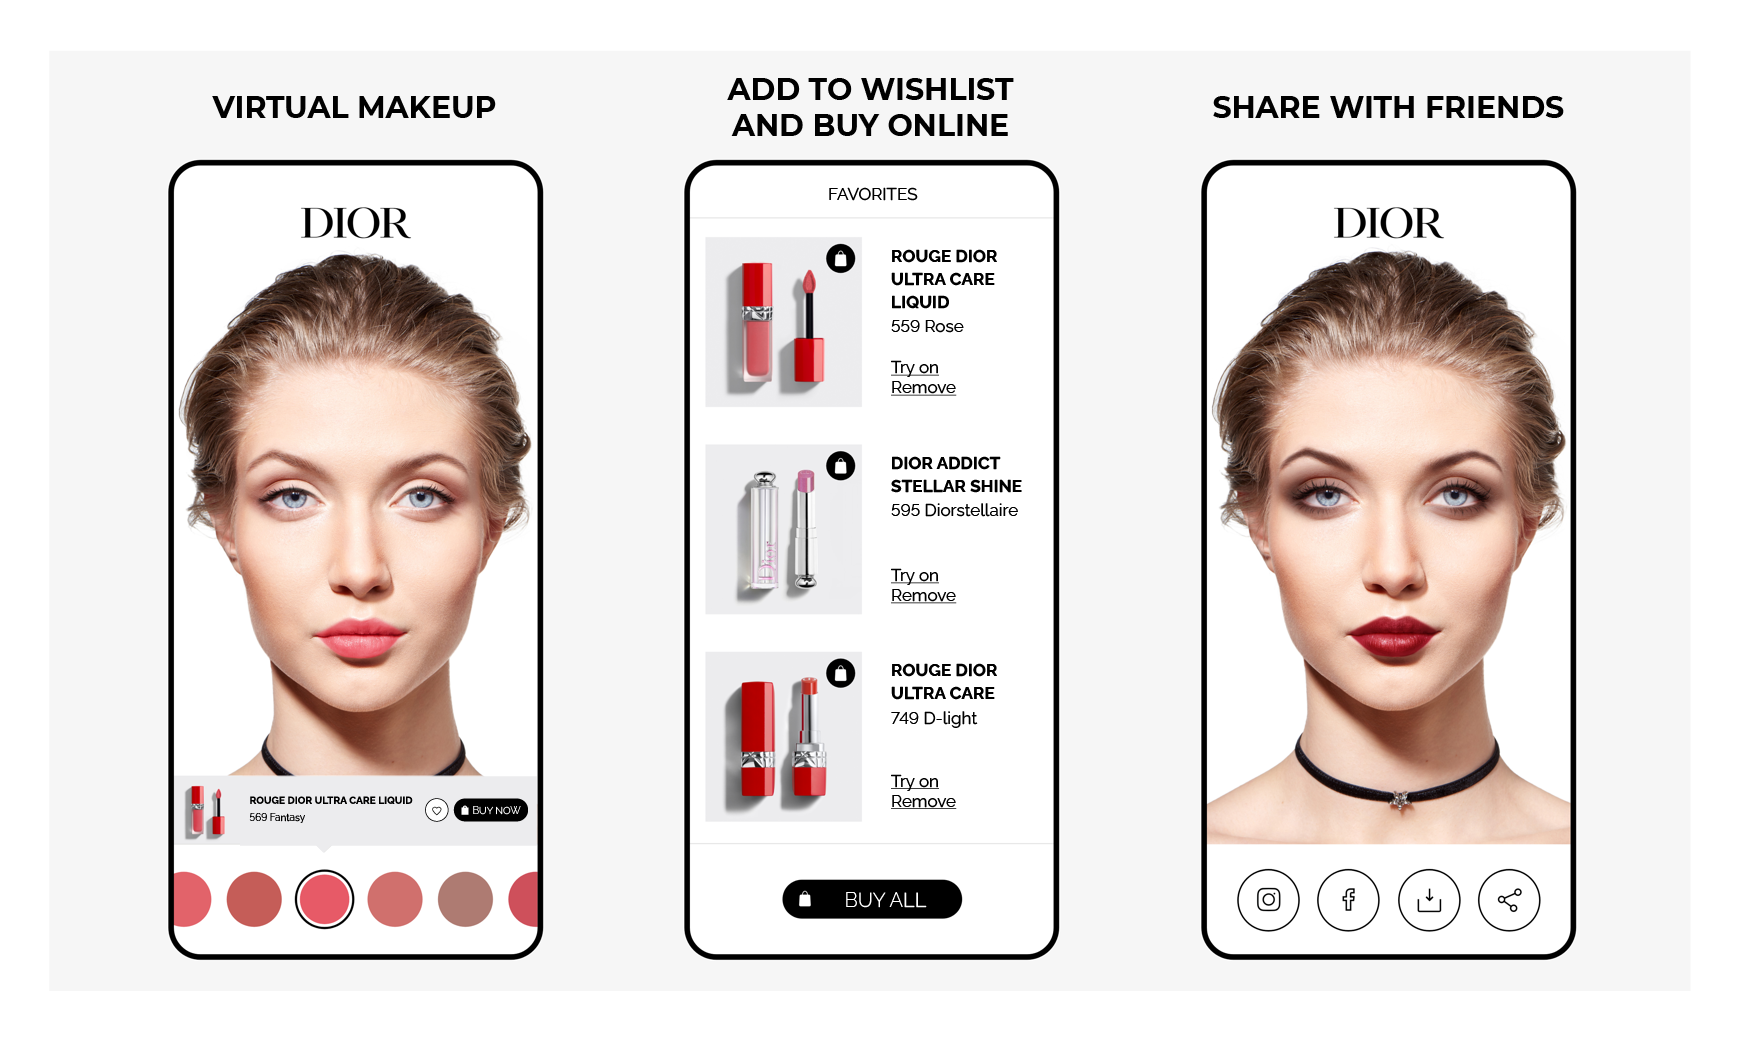 3 visuals of the Dior app  side by side. The first and third represent show the face of a female-presenting person with a palette of lipstick colors. The second one shows the lipsticks corresponding to the colors, which can be purchased. The third shows w